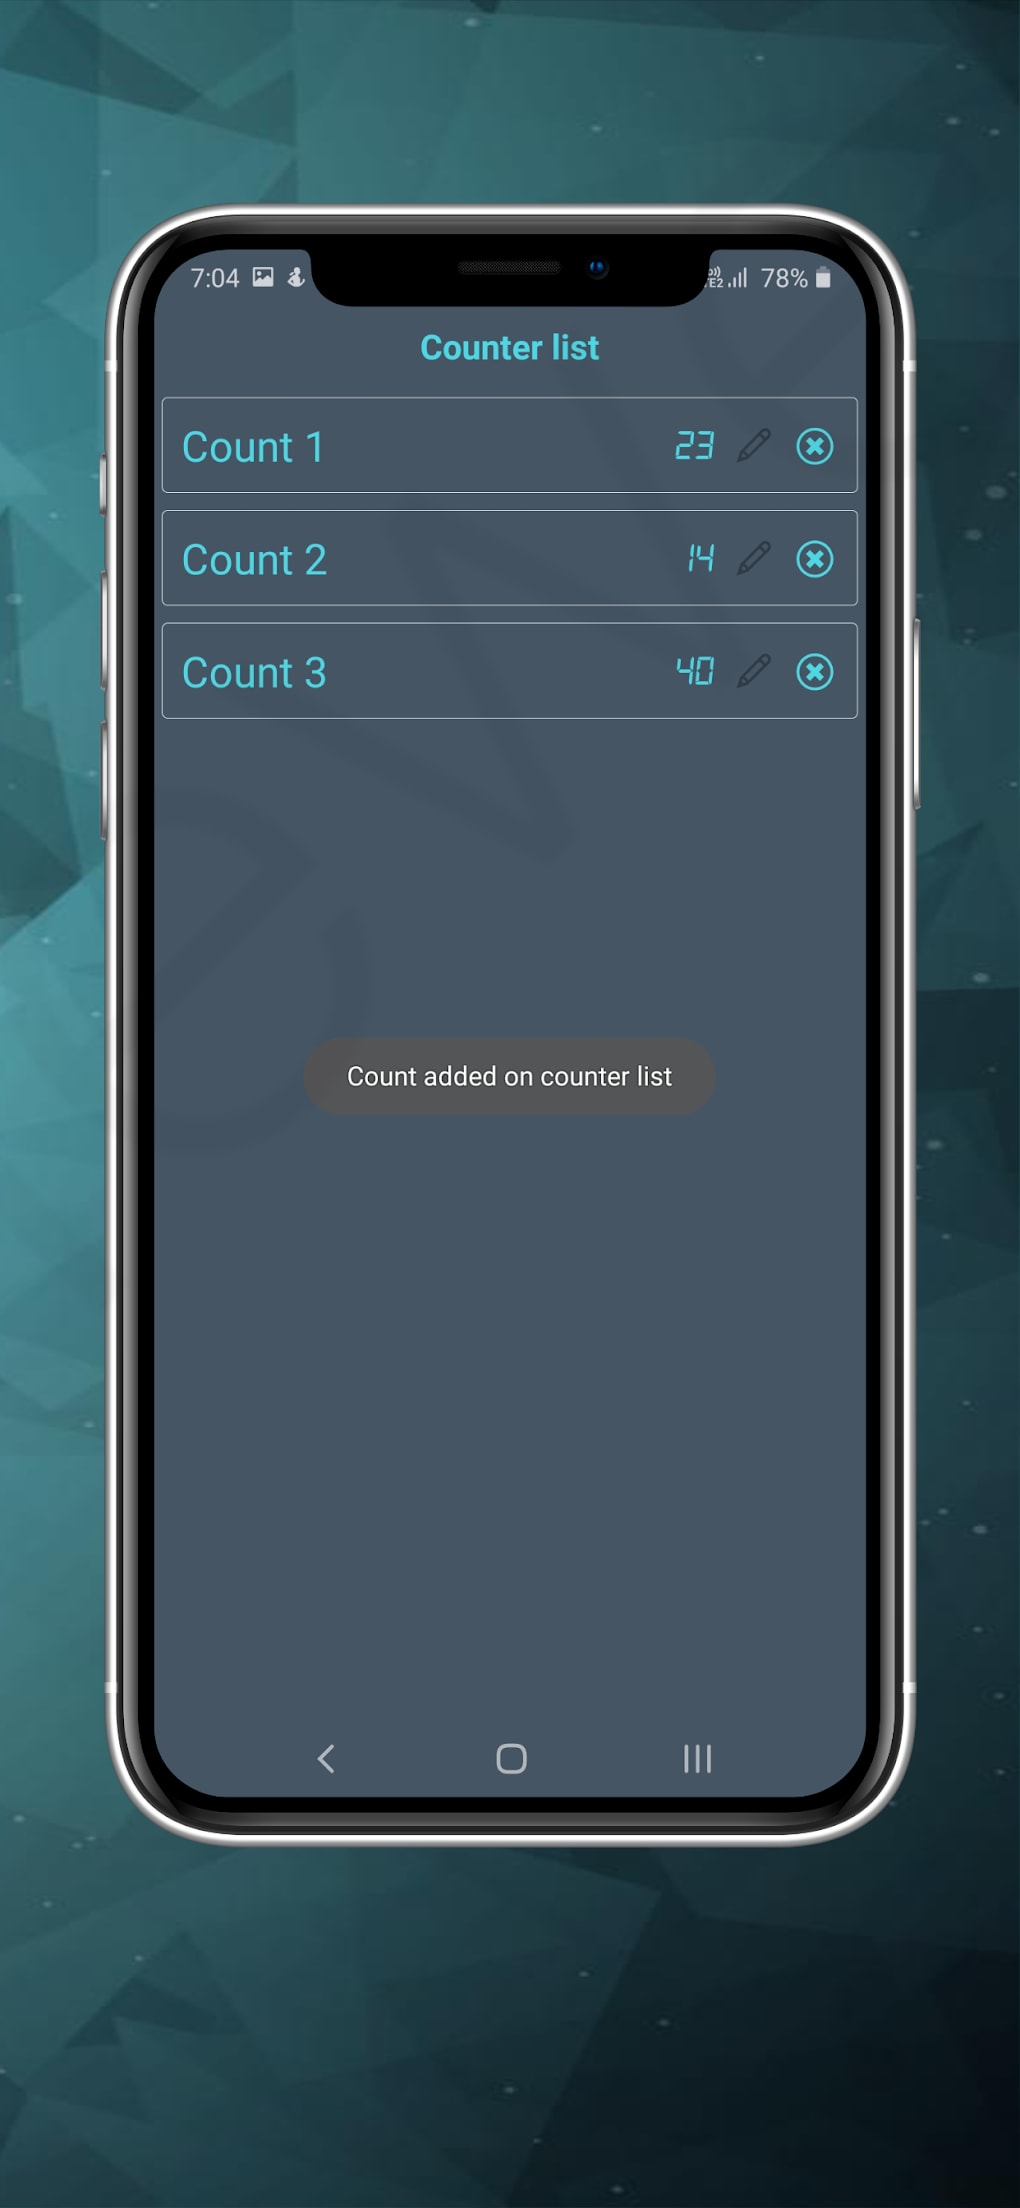 Digital Tasbeeh Counter, Tally Counter App - Official app in the Microsoft  Store